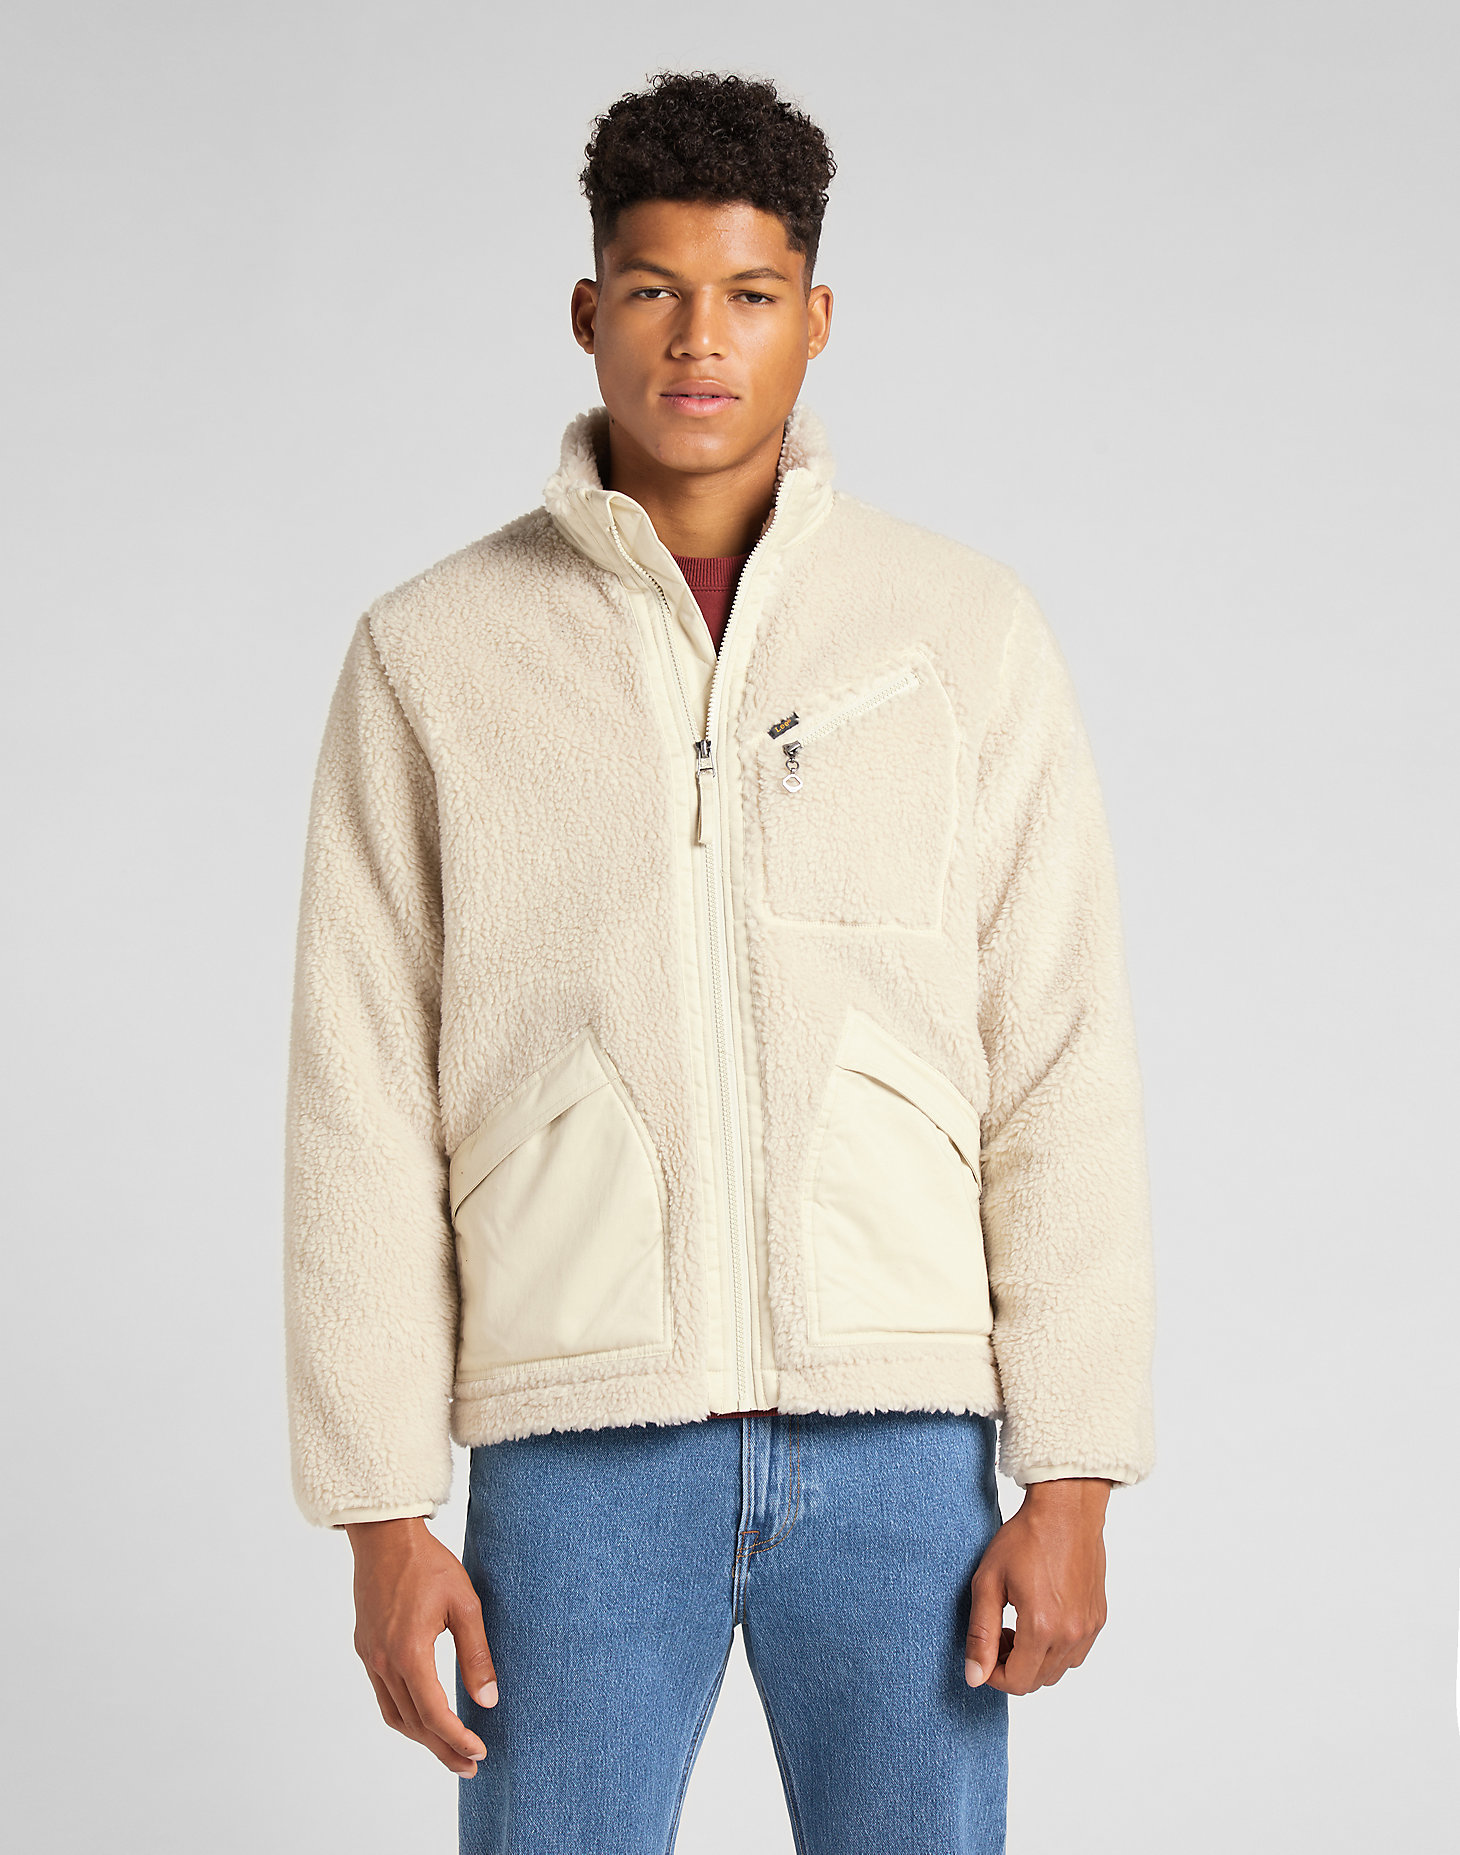 Full Sherpa Jacket in Papyrus alternative view 1